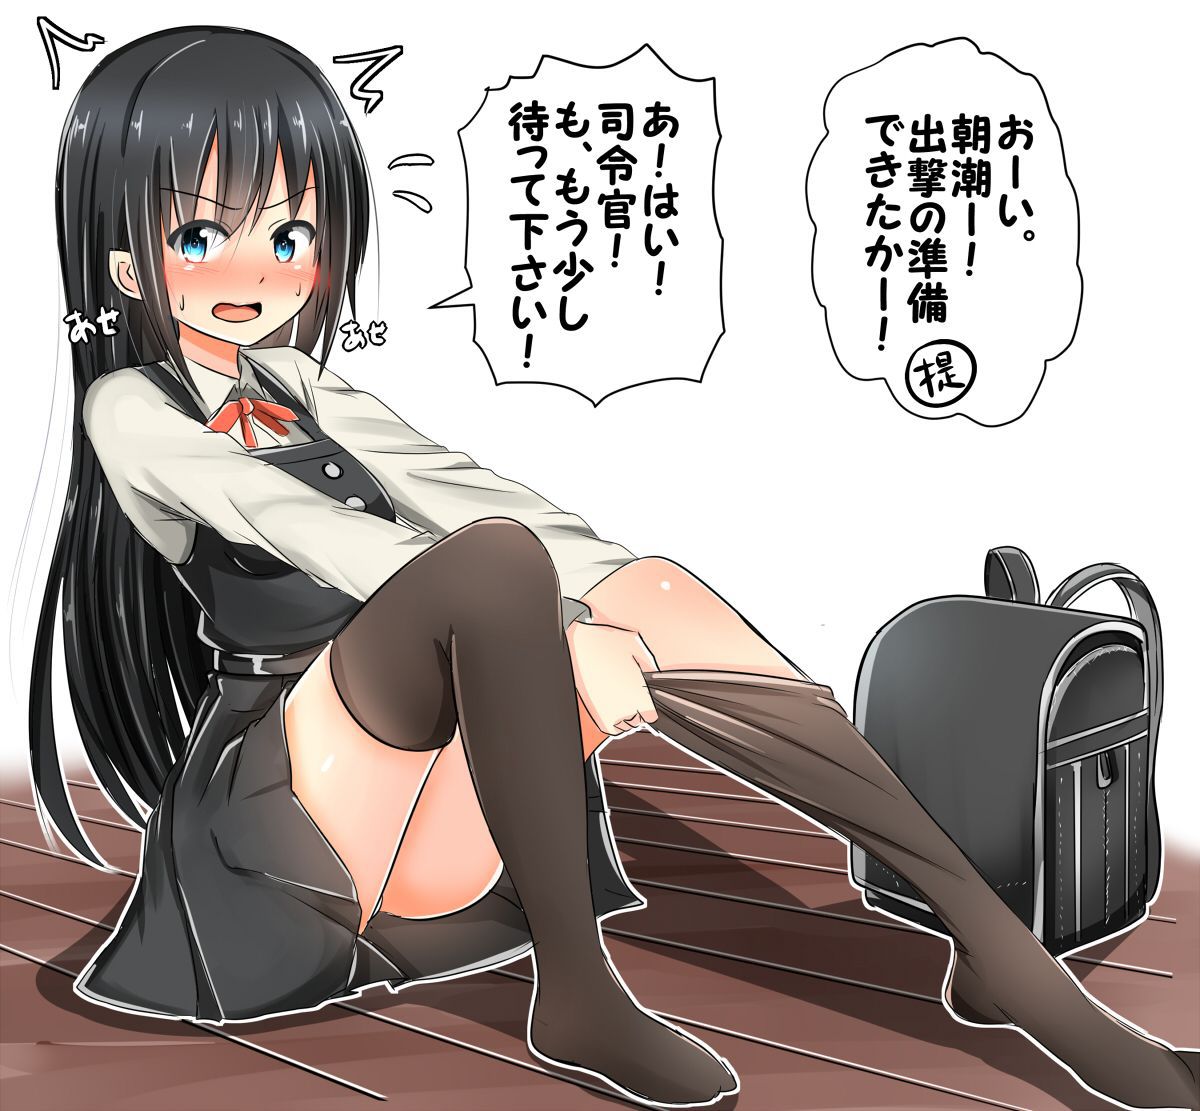 [Secondary, ZIP] pretty serious ship it together images of asashio 100 37